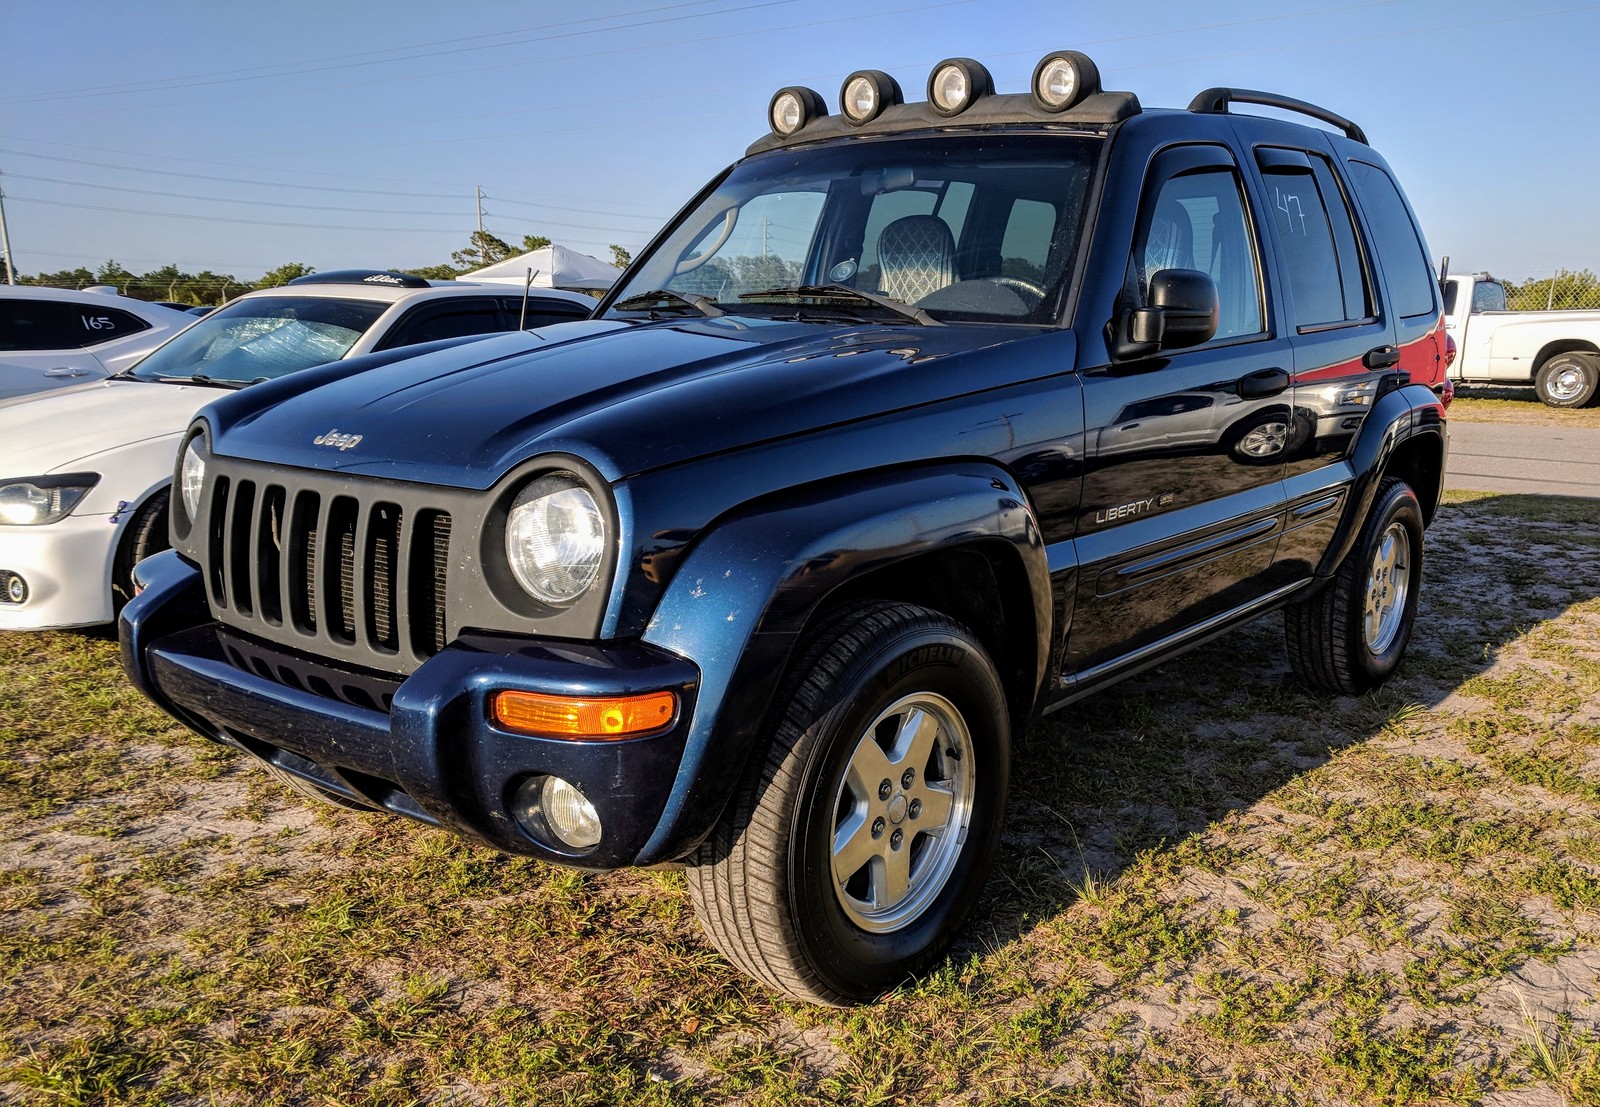 2002 Metallic Blue Jeep Liberty Limited picture, mods, upgrades